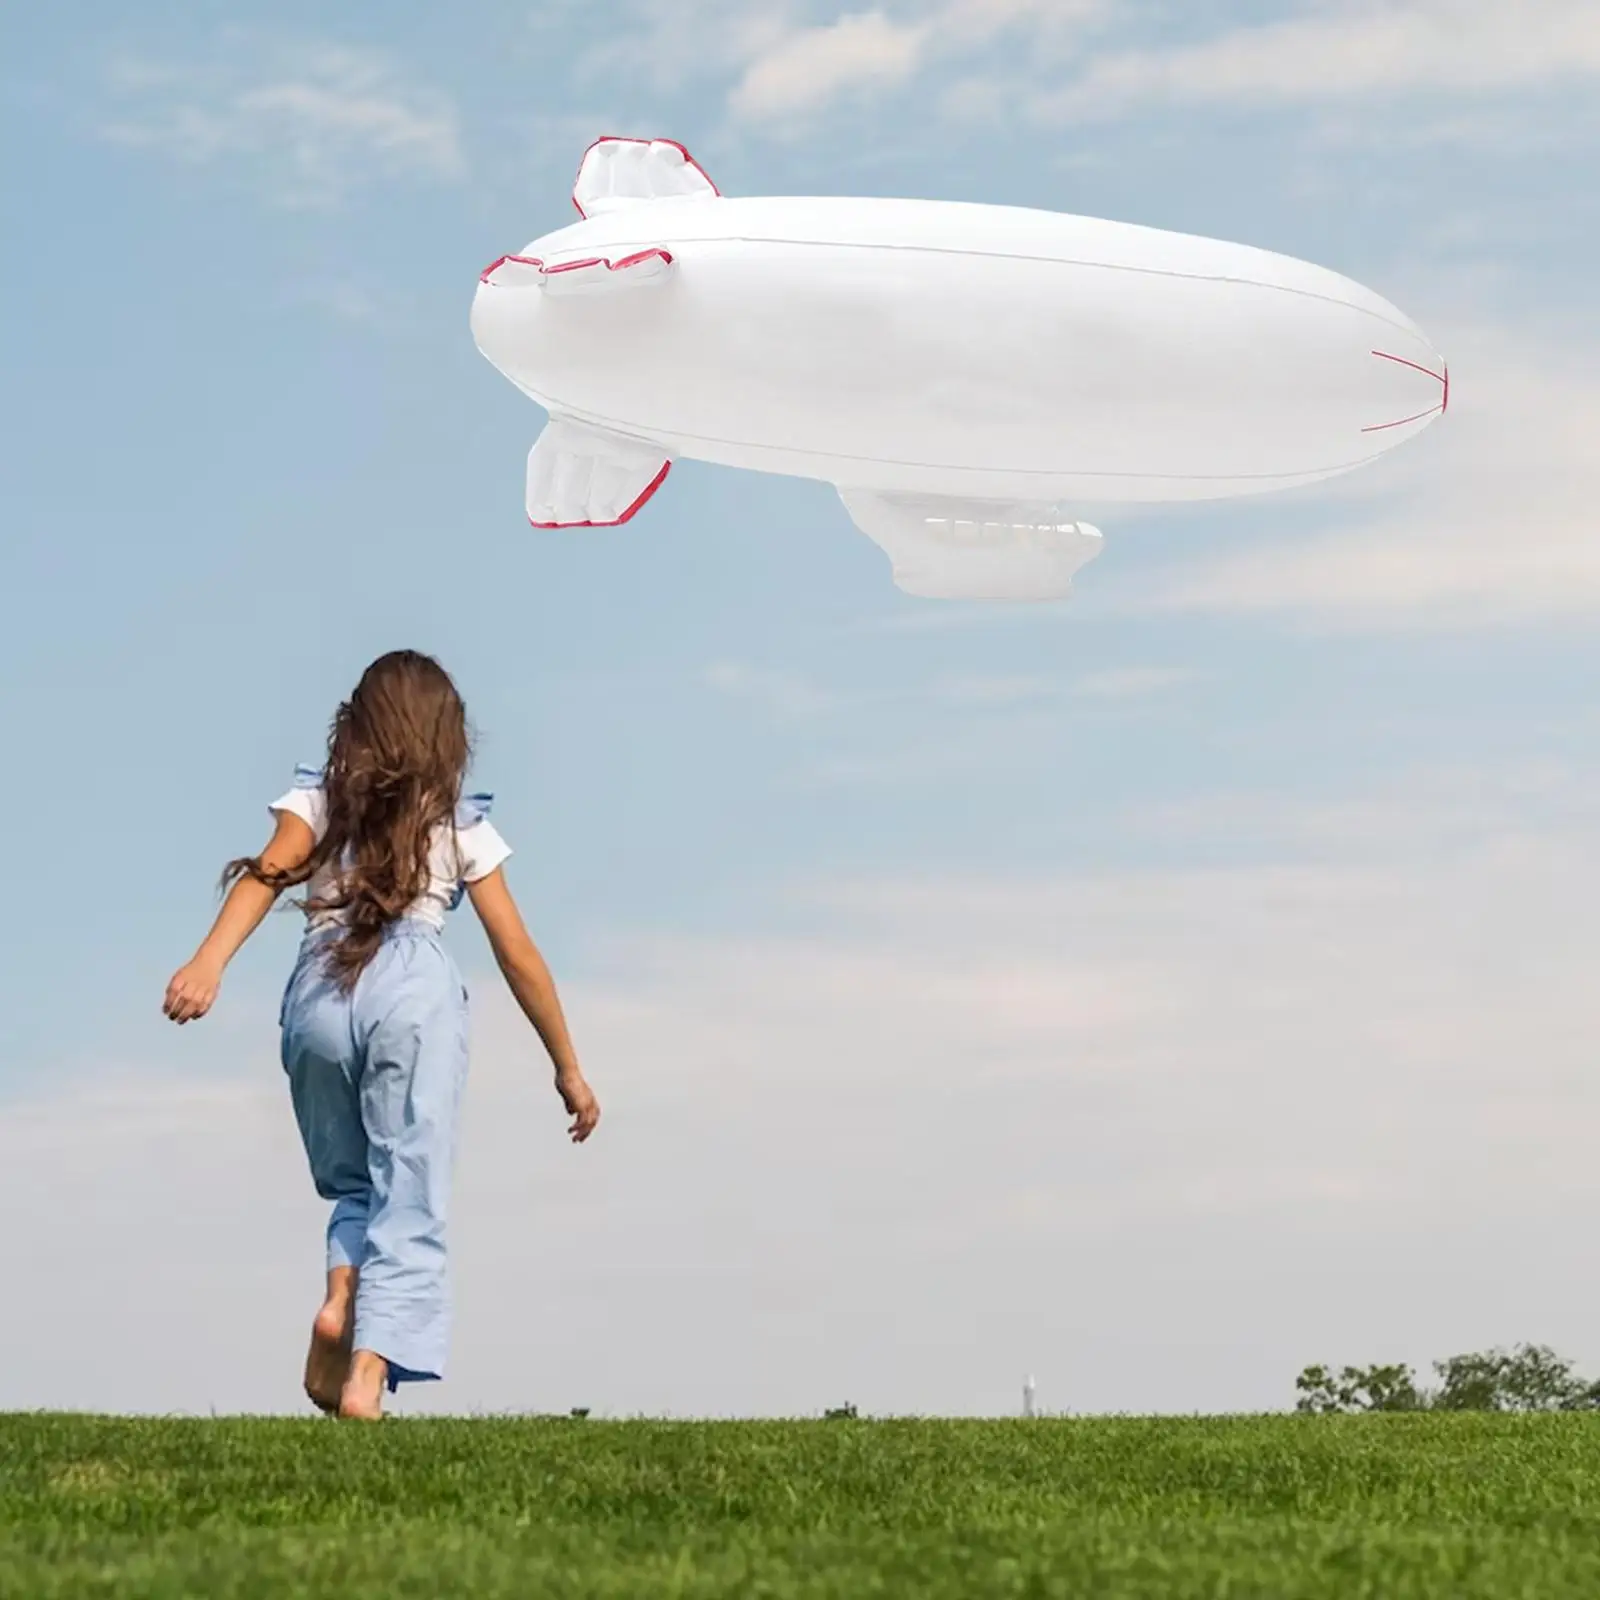 Inflatable Airship Model Save Space Collapsiblefoldable Spaceship Model for Celebration Birthday Wedding Theme Party Ornaments